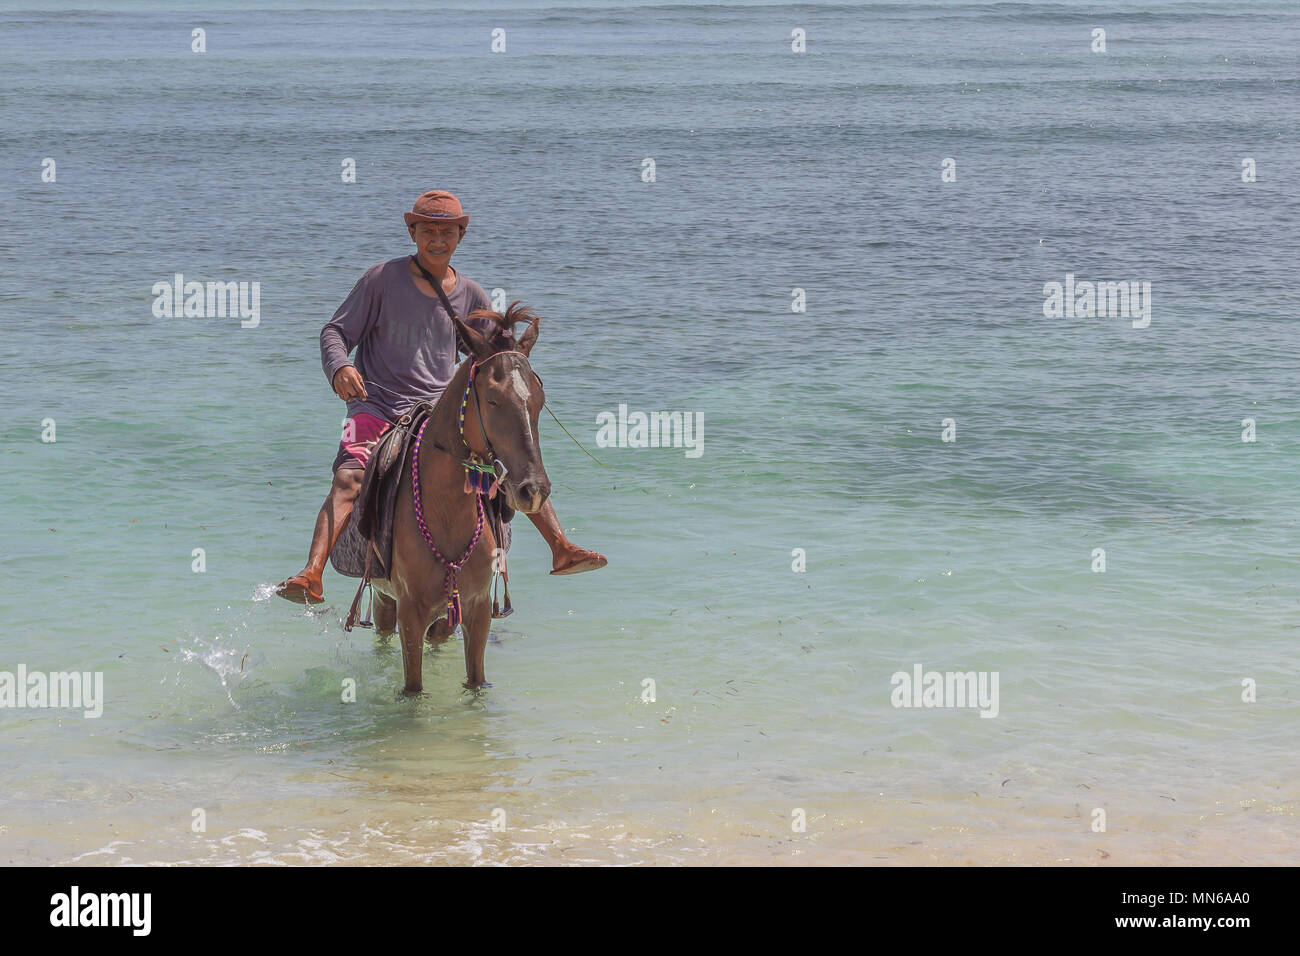 A man riding his horse in the shallow blue and green tropical  water at  Gili Trawangan, Indonesia, april 24, 2018, Stock Photo